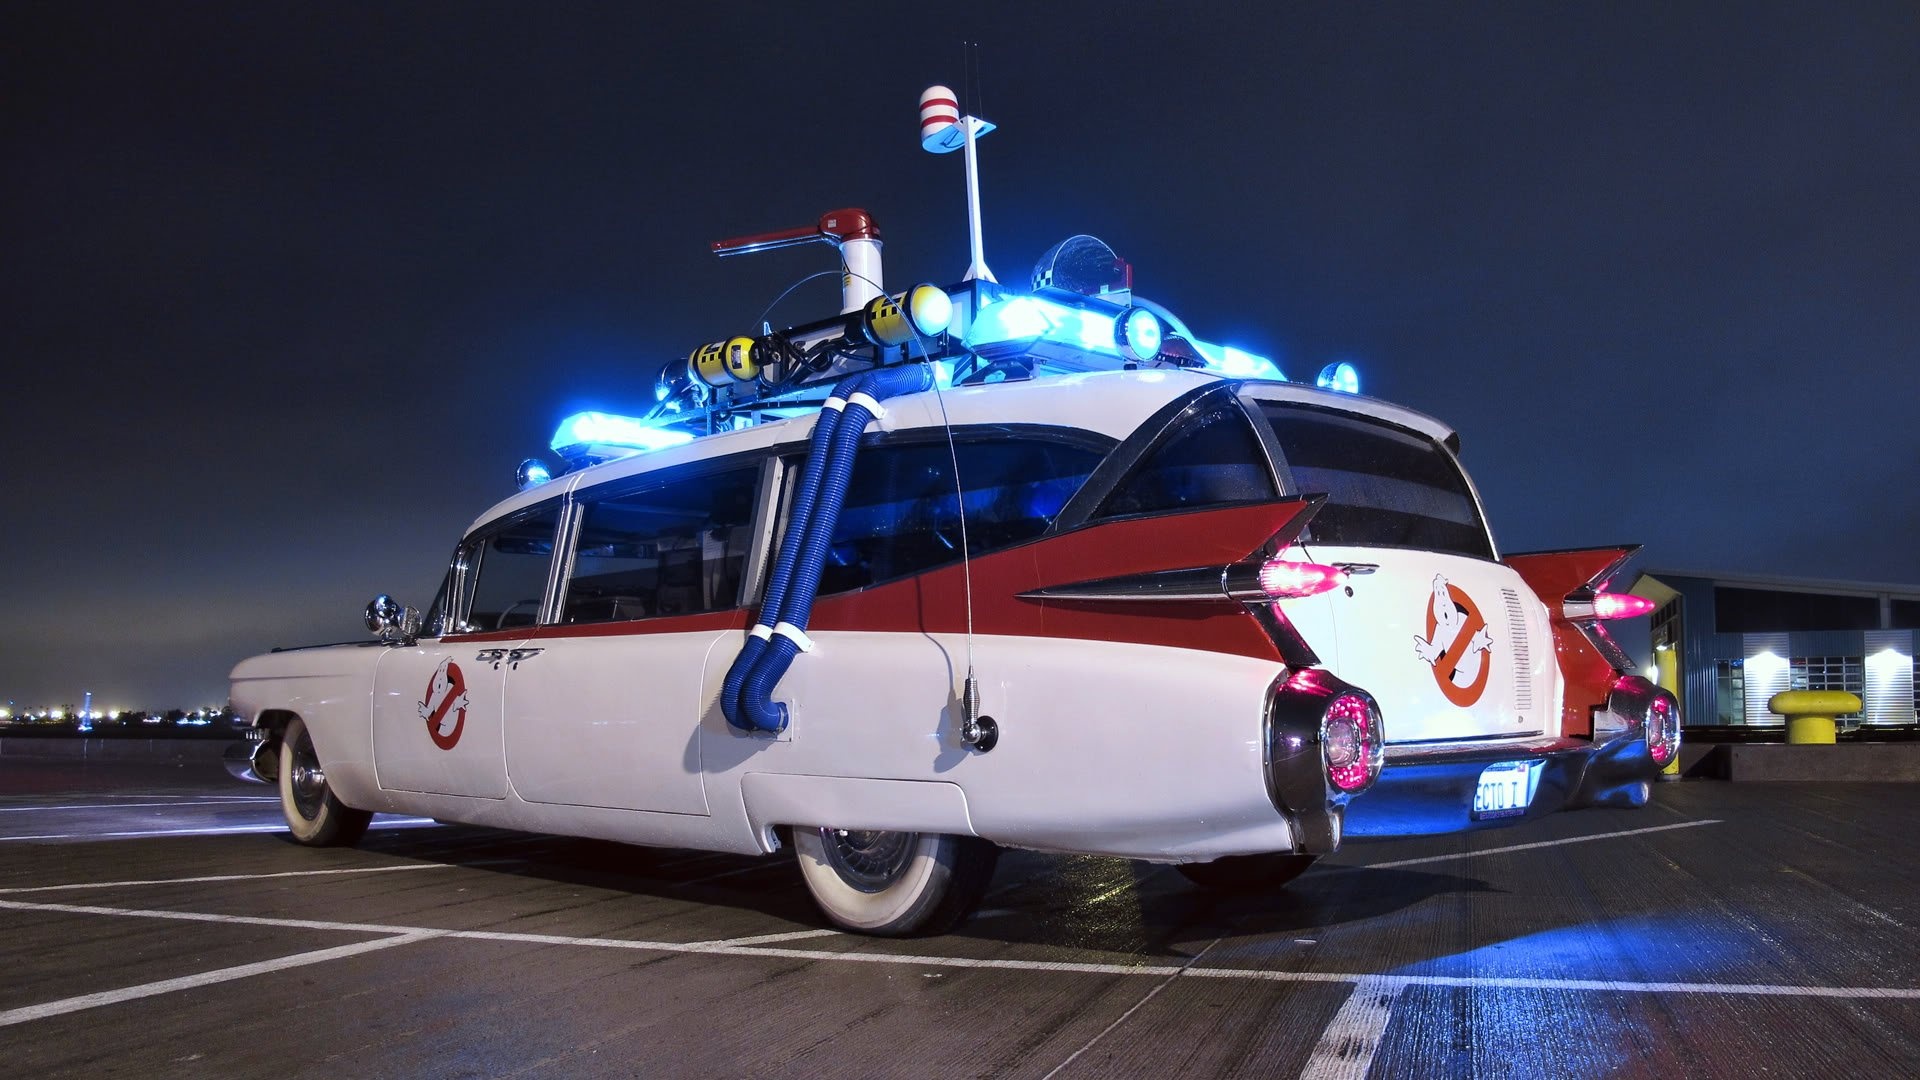 Ghostbusters: Action, Adventure, Supernatural, Comedy, Ghost, Ambulance, Emergency. 1920x1080 Full HD Wallpaper.